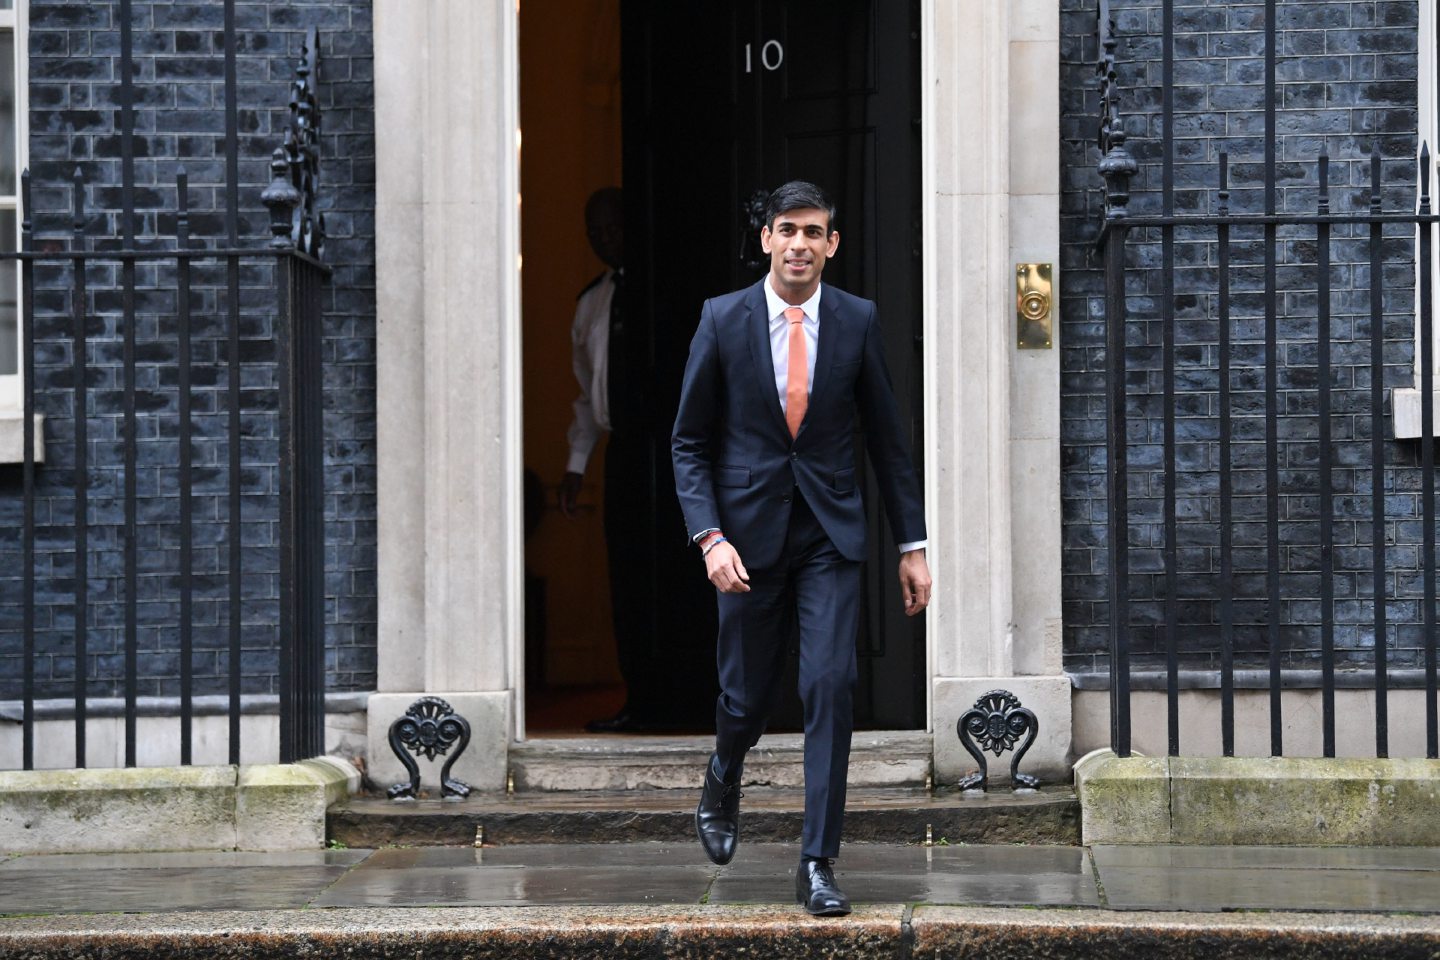 The UK budget could be delayed further following the resignation of Sajid Javid and the appointment of Rishi Sunak (pictured) to Number 11